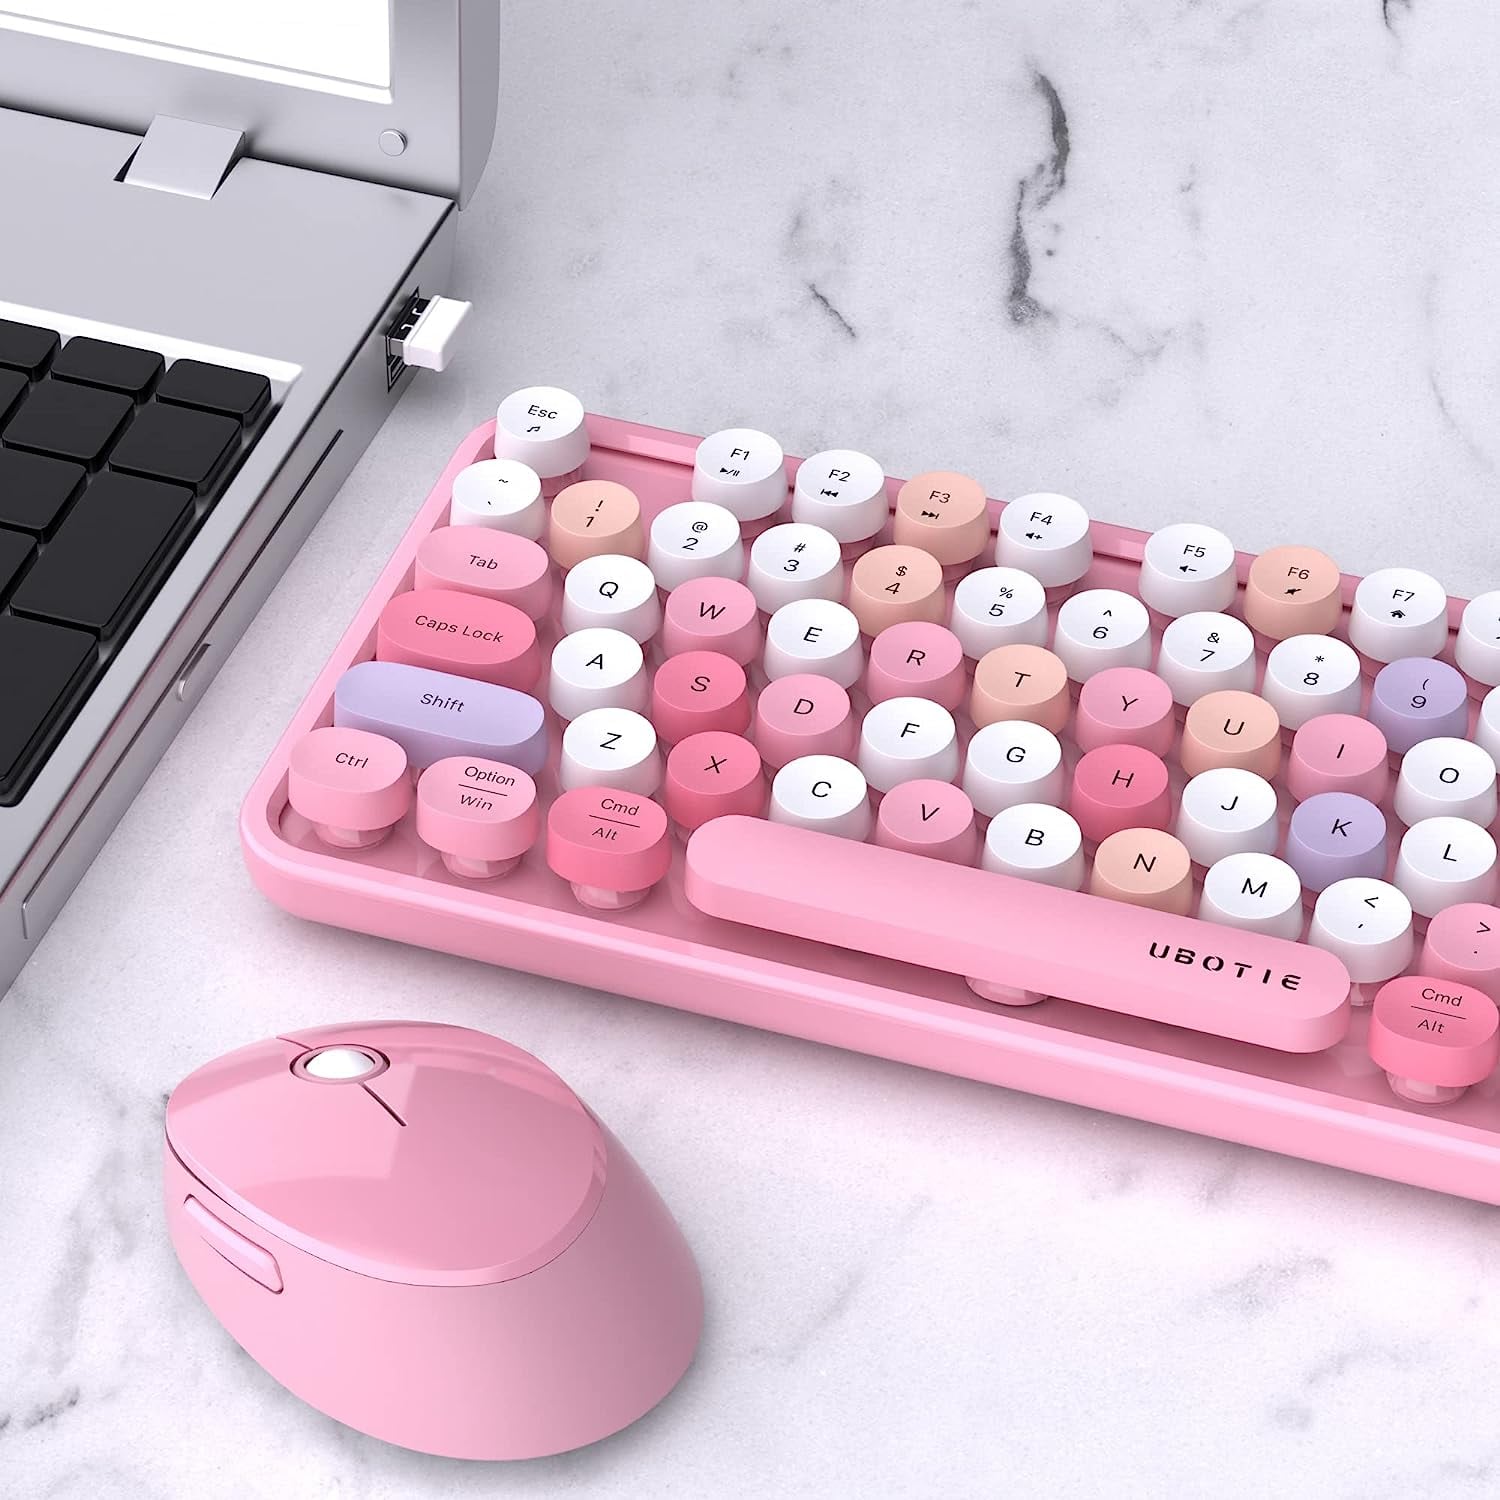 5 Reasons Why Cute Keyboard Is Your Best Gift Idea In 2023